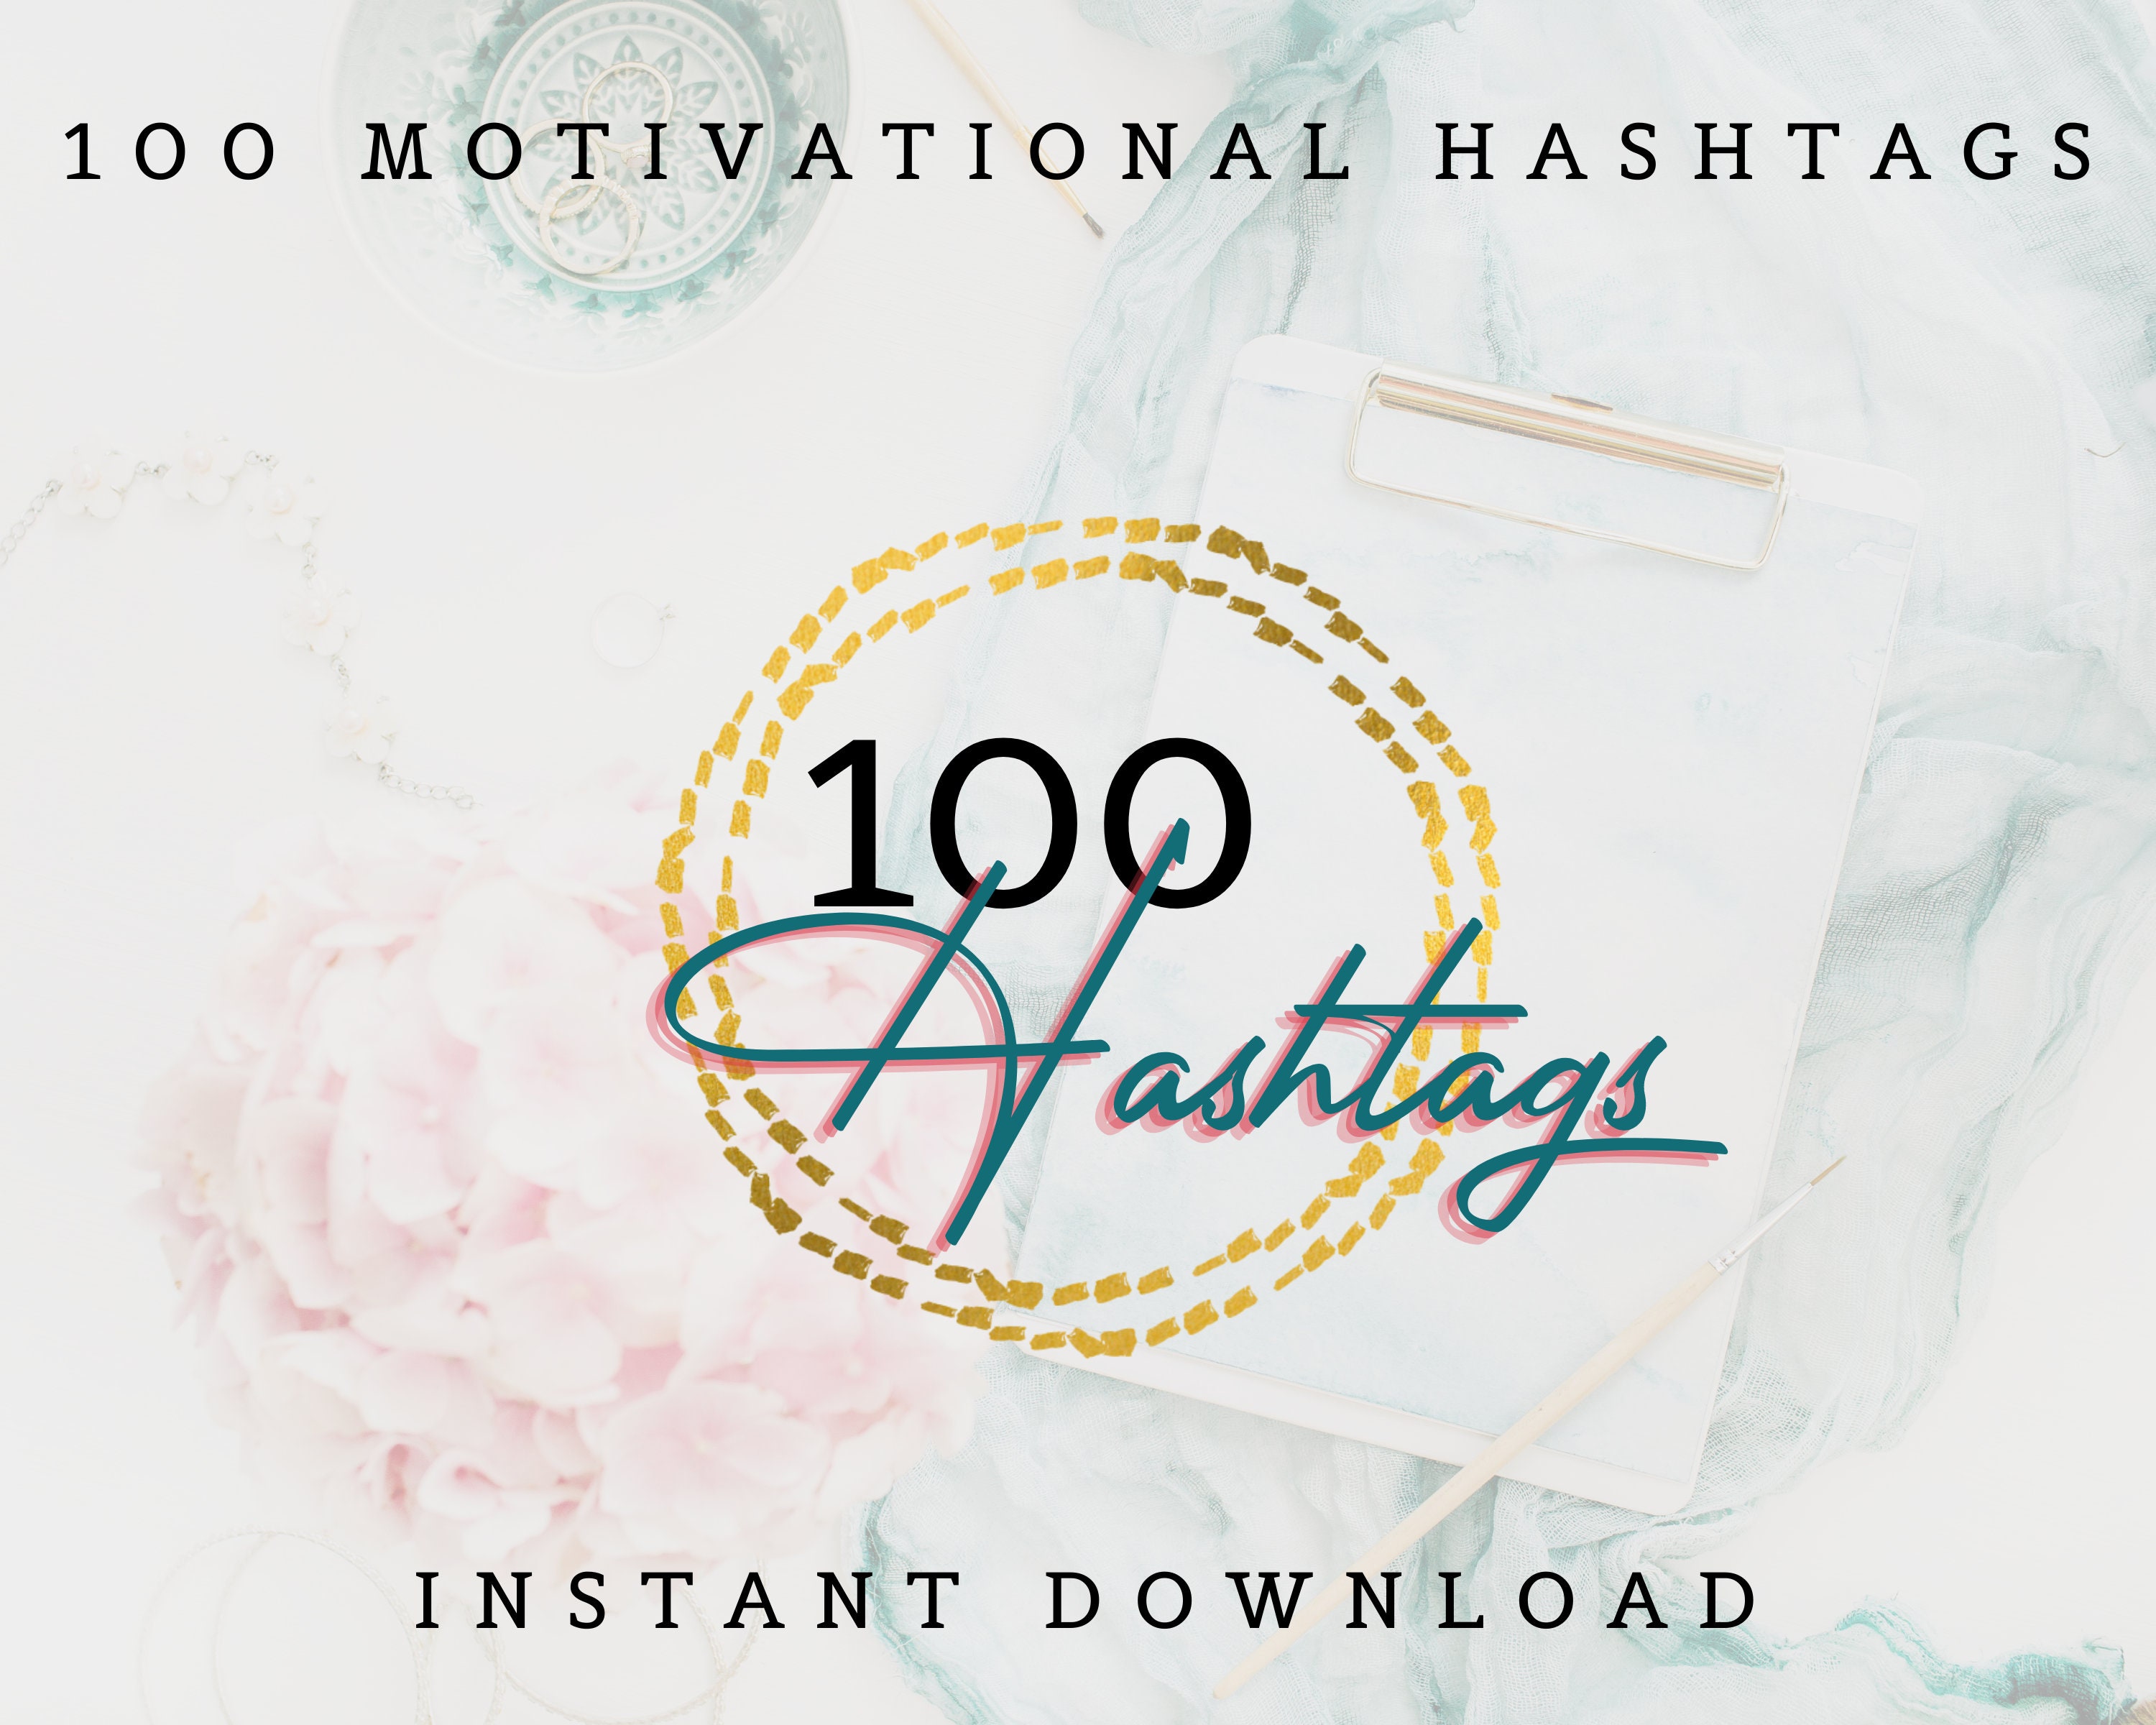 100 Motivational Hashtags to Help You Scale Your Business Etsy